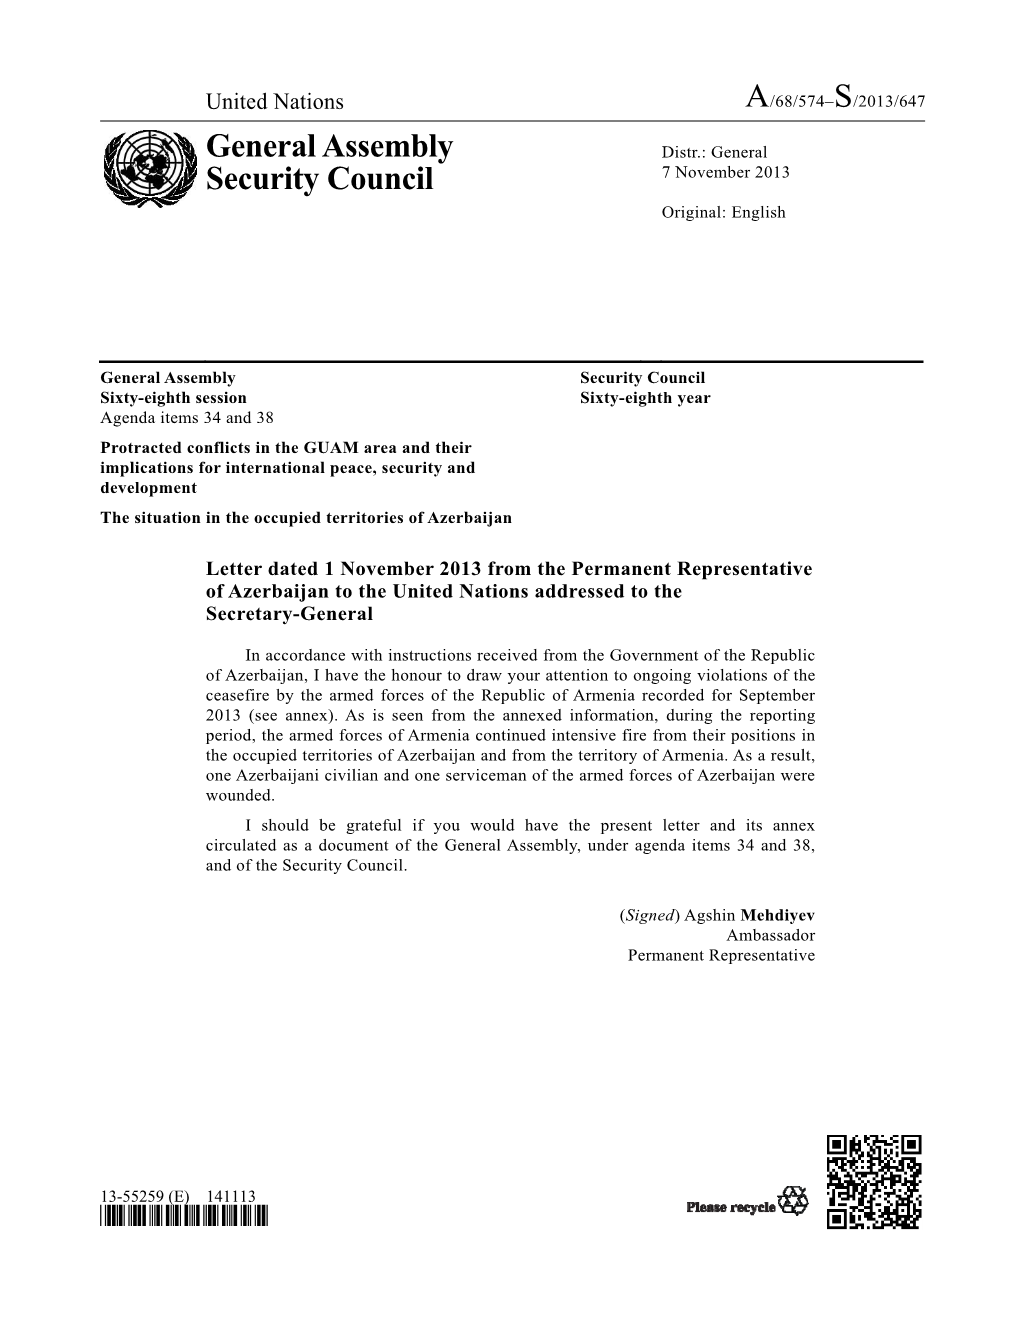 General Assembly Security Council Sixty-Eighth Session Sixty-Eighth Year Agenda Items 34 and 38